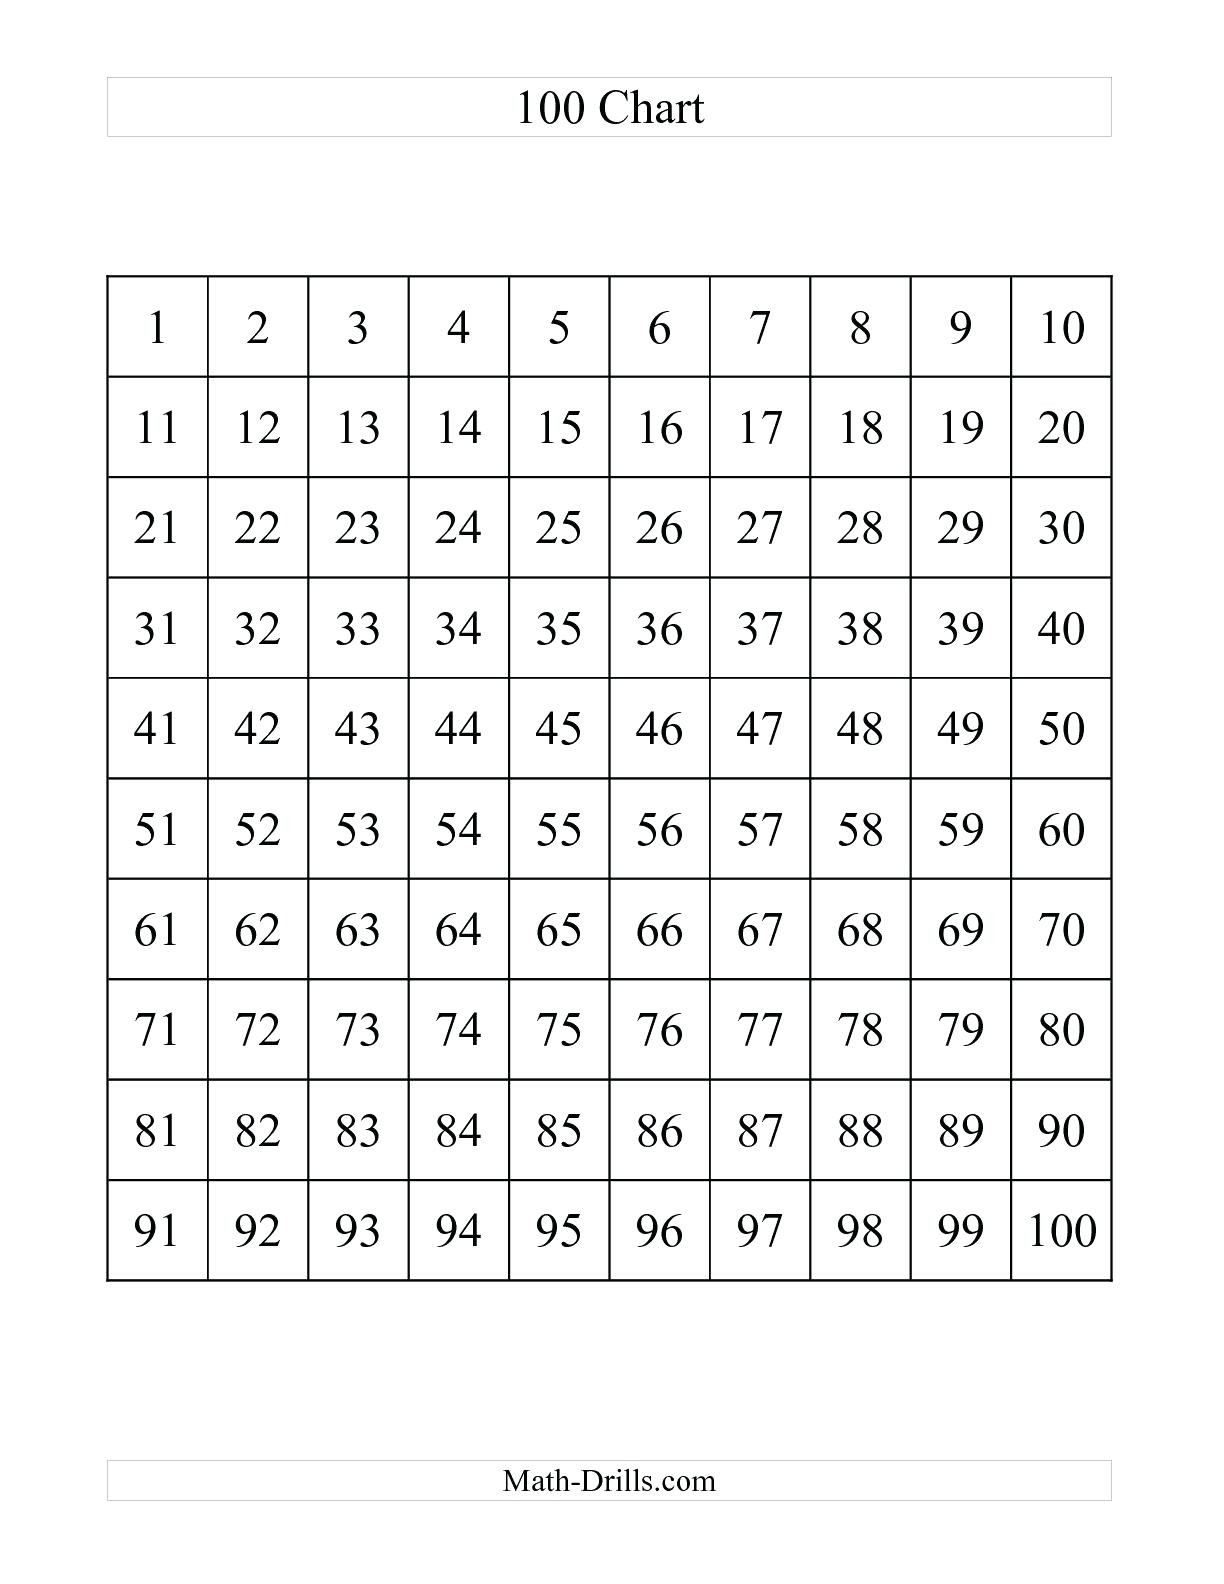 Blank 100 Chart To 120 | Wiring Library - Free Printable Hundreds Chart To 120